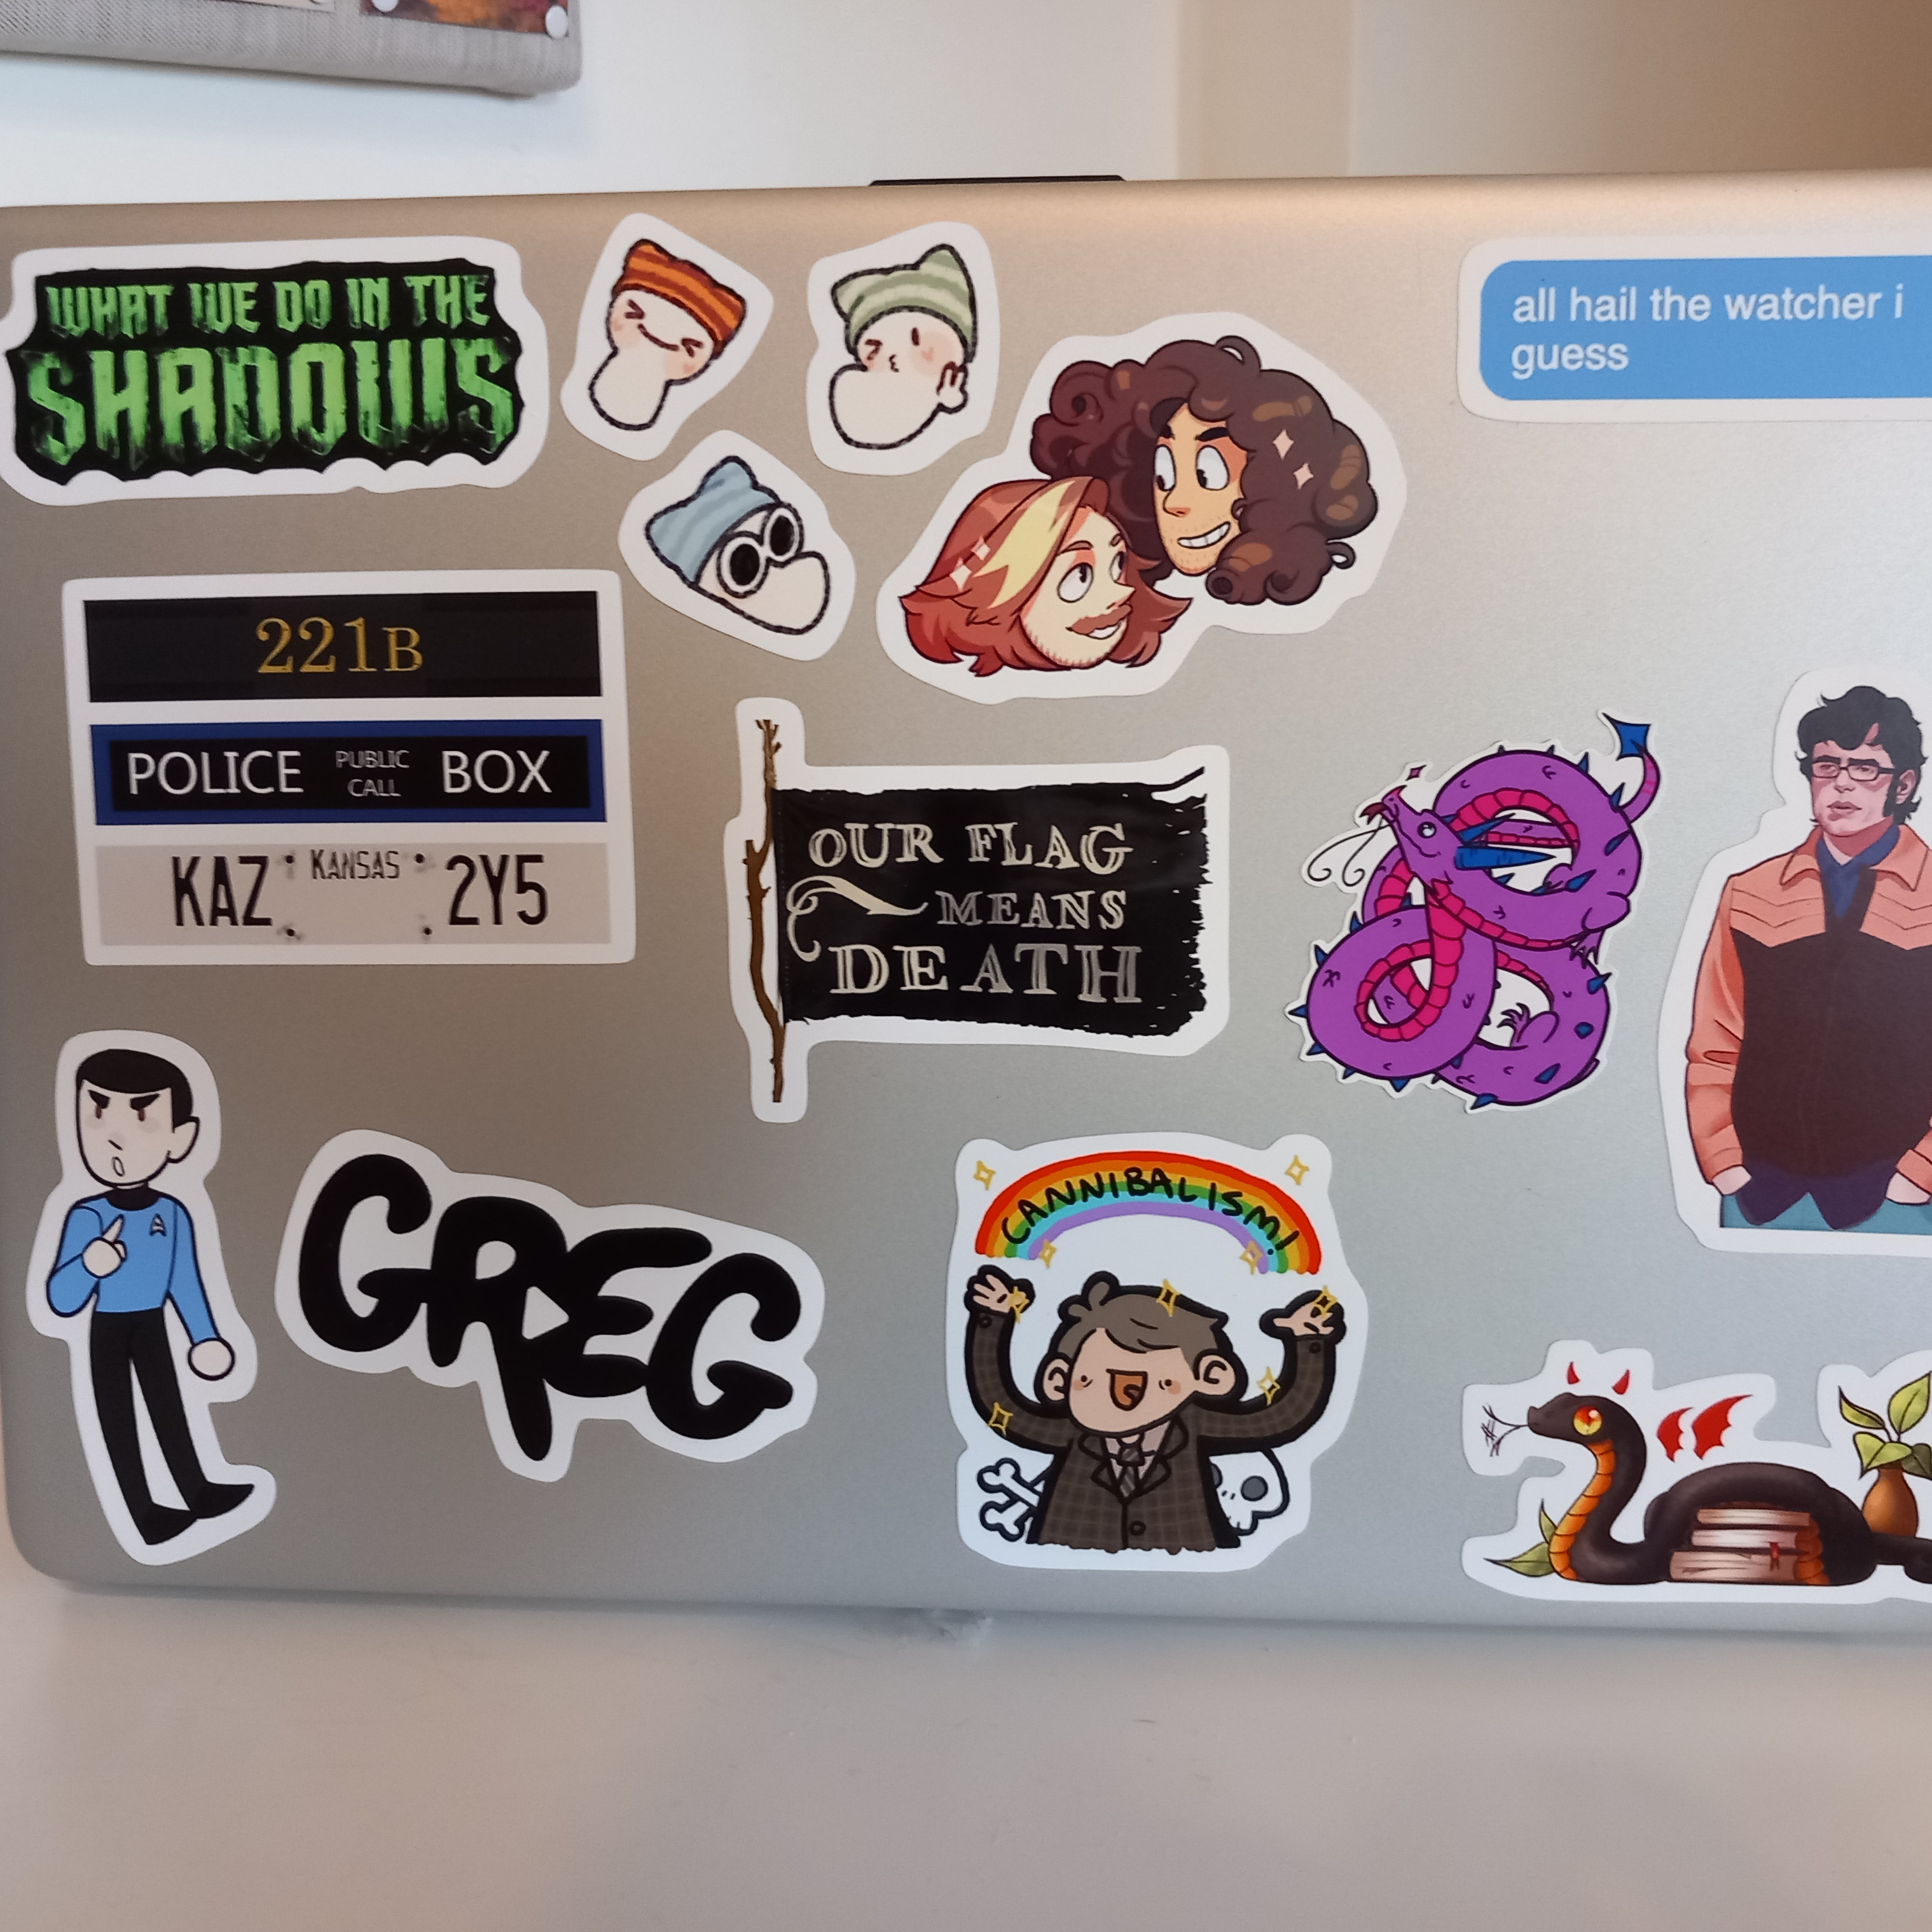 The backside of a laptop with many colorful stickers on it. The stickers are logos from fandoms, for example 'Game Grumps', 'What we do in the Shadows', and 'Our Flag Means Death'.